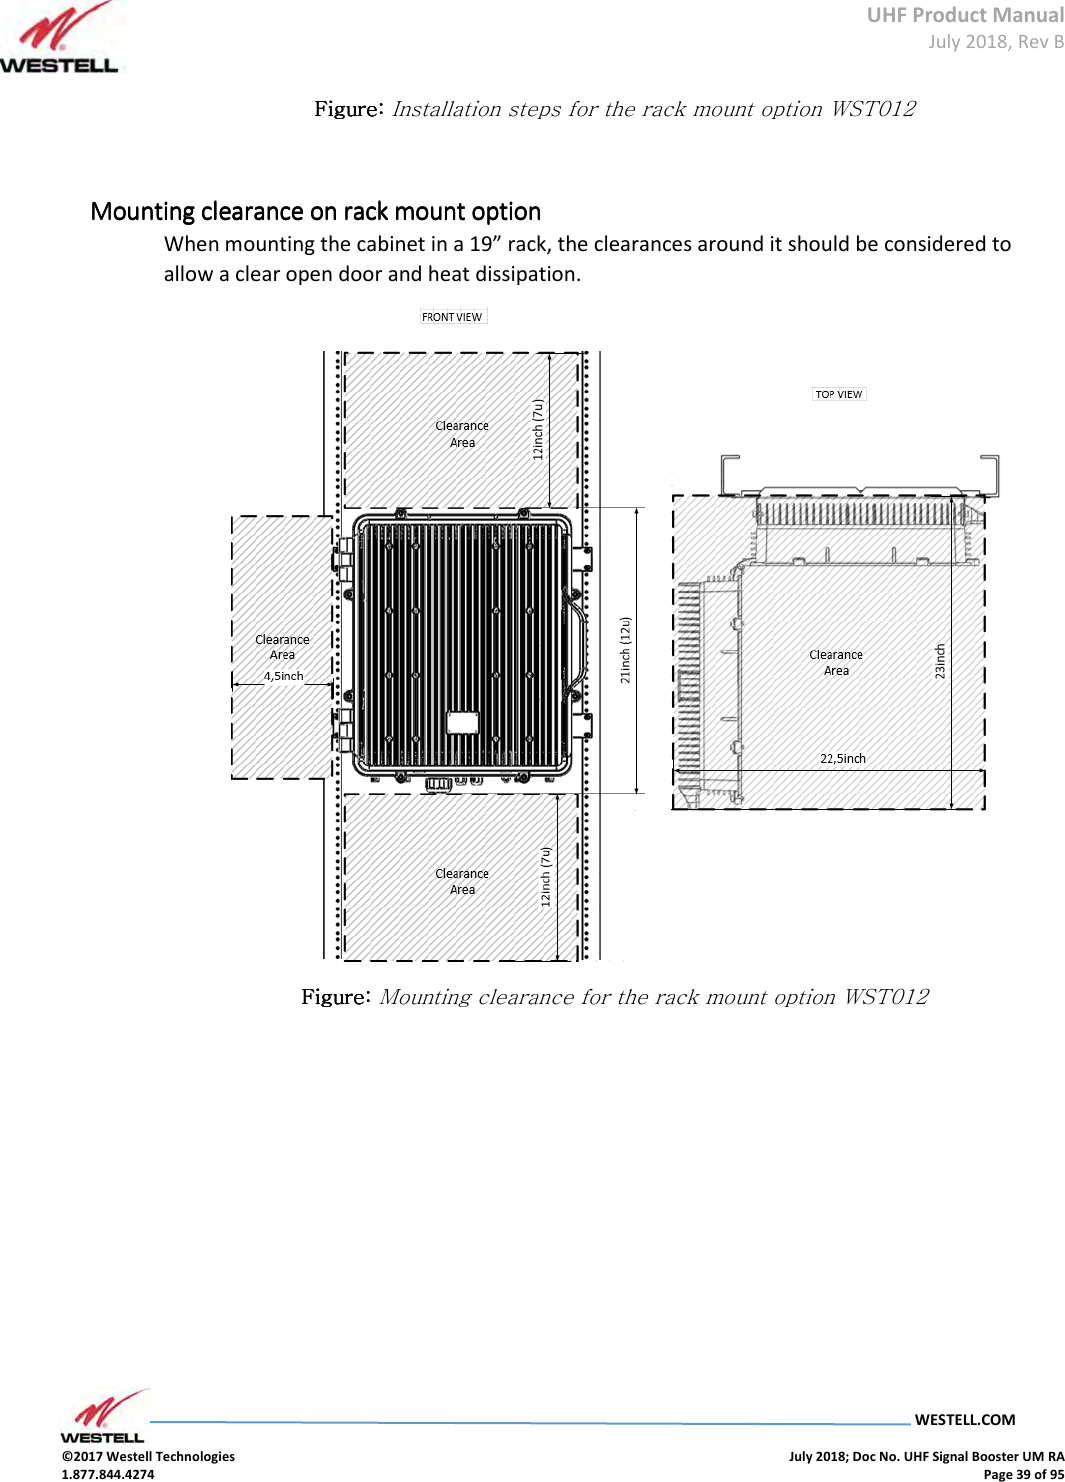 UHF Product Manual July 2018, Rev B   WESTELL.COM  ©2017 Westell Technologies    July 2018; Doc No. UHF Signal Booster UM RA 1.877.844.4274    Page 39 of 95  Figure: Figure: Figure: Figure: Installation steps for the rack mount option WST012  Mounting Mounting Mounting Mounting clearance on rack mount optionclearance on rack mount optionclearance on rack mount optionclearance on rack mount option    When mounting the cabinet in a 19” rack, the clearances around it should be considered to allow a clear open door and heat dissipation.  Figure:Figure:Figure:Figure: Mounting clearance for the rack mount option WST012     